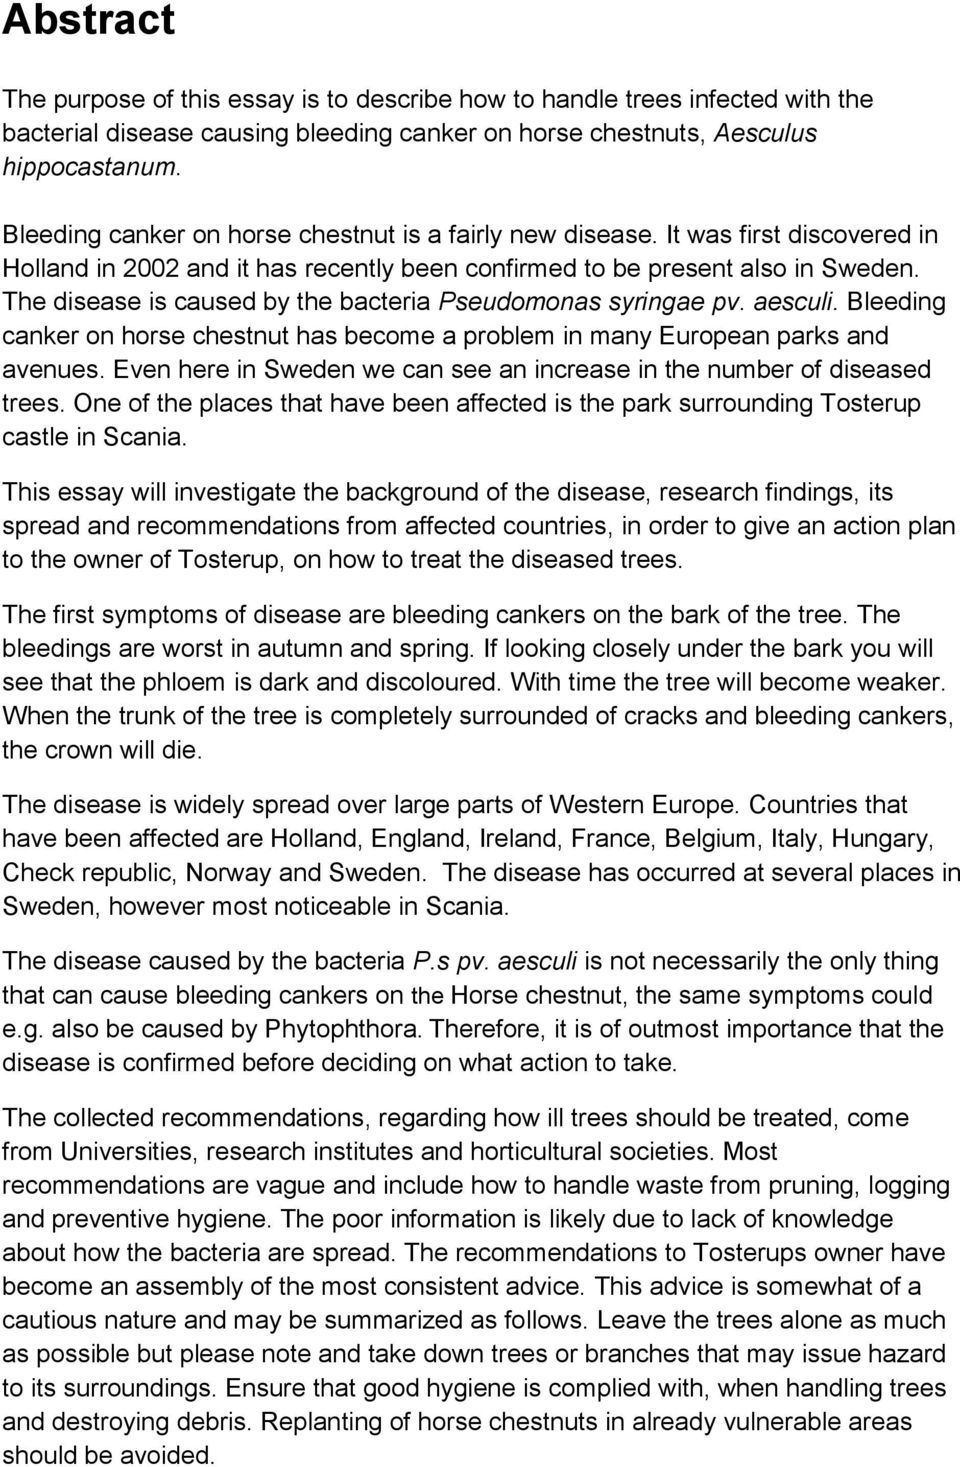 The disease is caused by the bacteria Pseudomonas syringae pv. aesculi. Bleeding canker on horse chestnut has become a problem in many European parks and avenues.